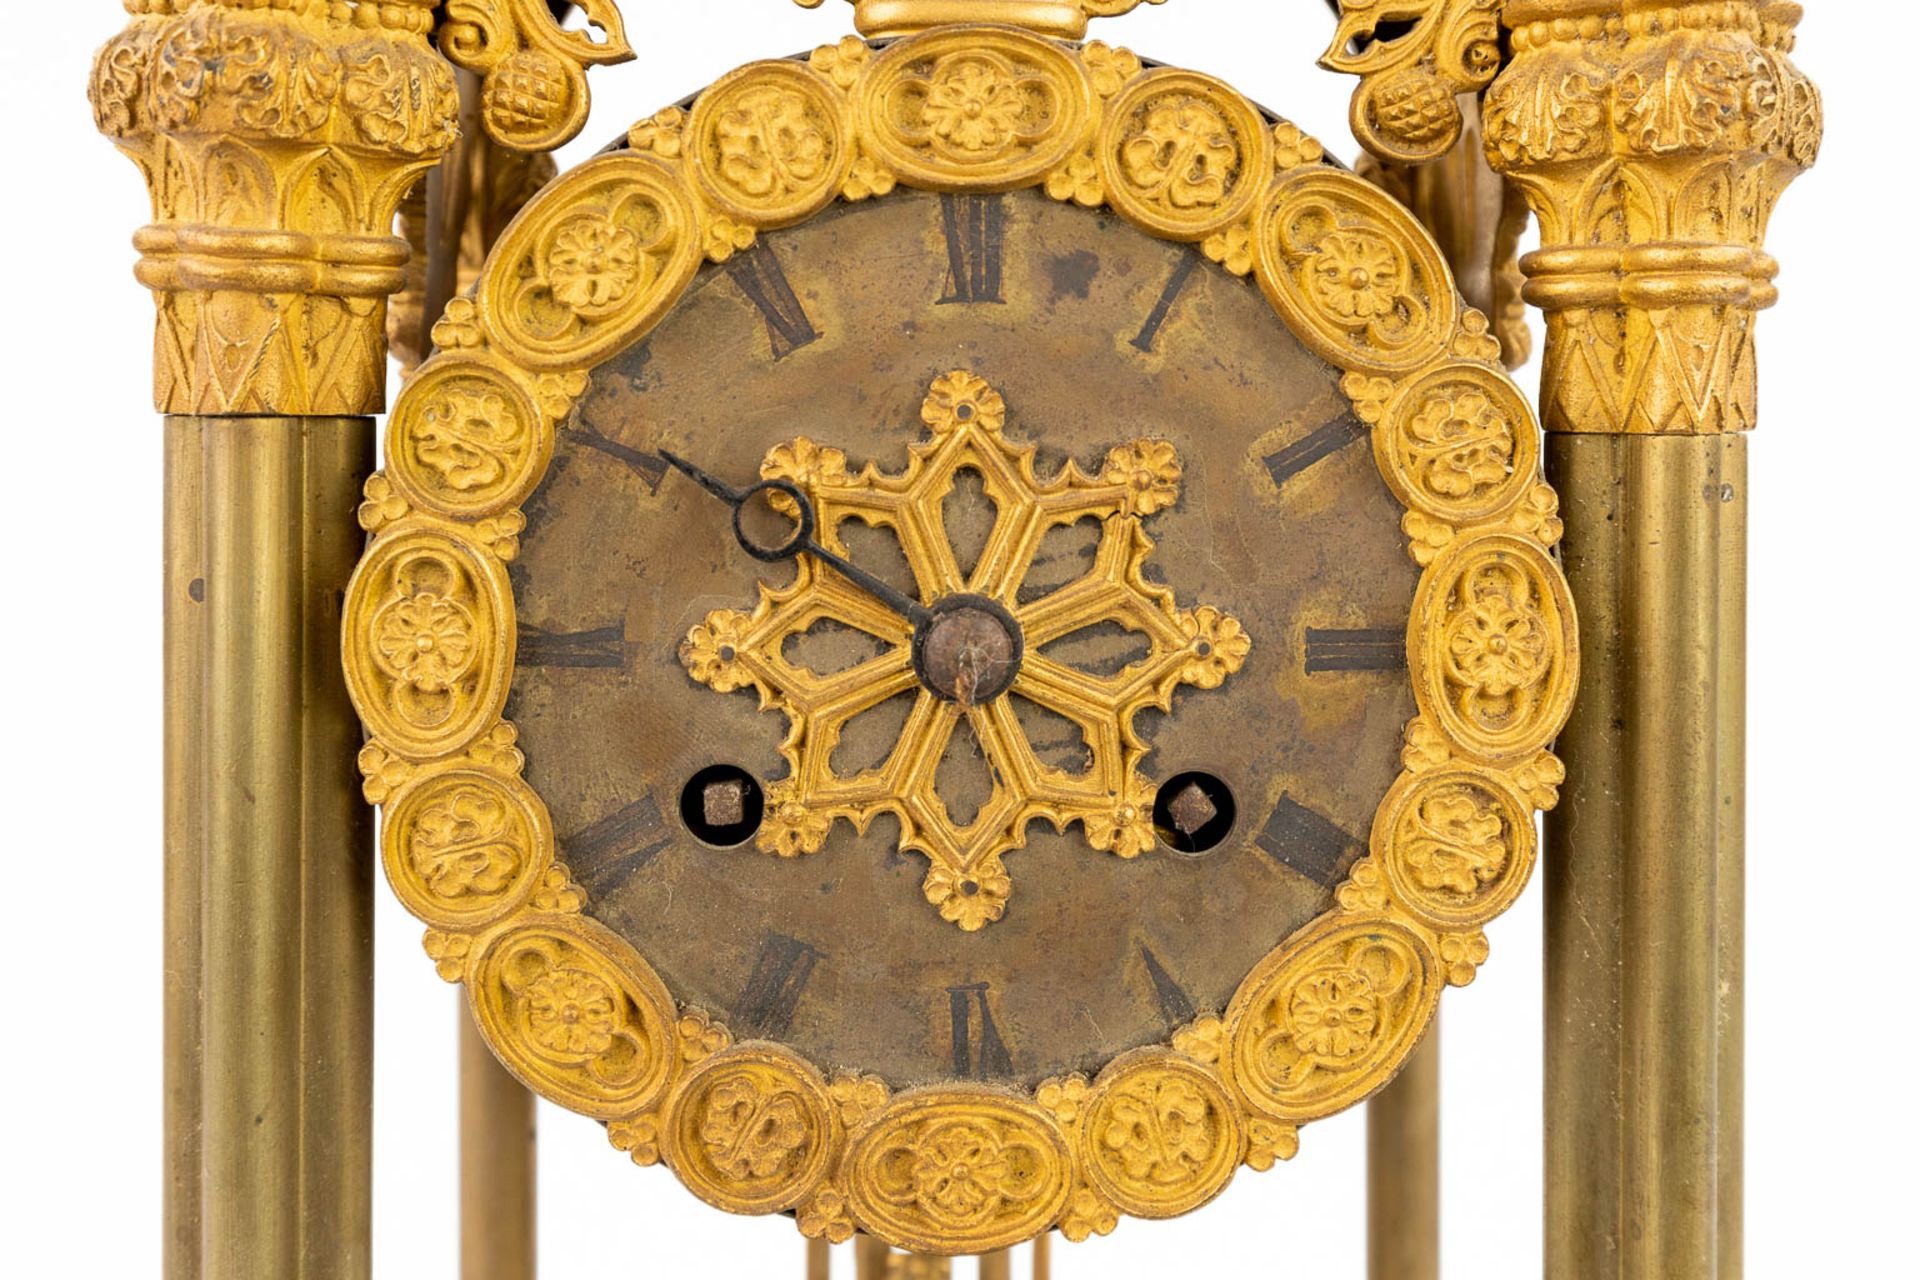 A table column clock made of gilt bronze in a gothic revival style. (11 x 19,5 x 43cm) - Image 11 of 15